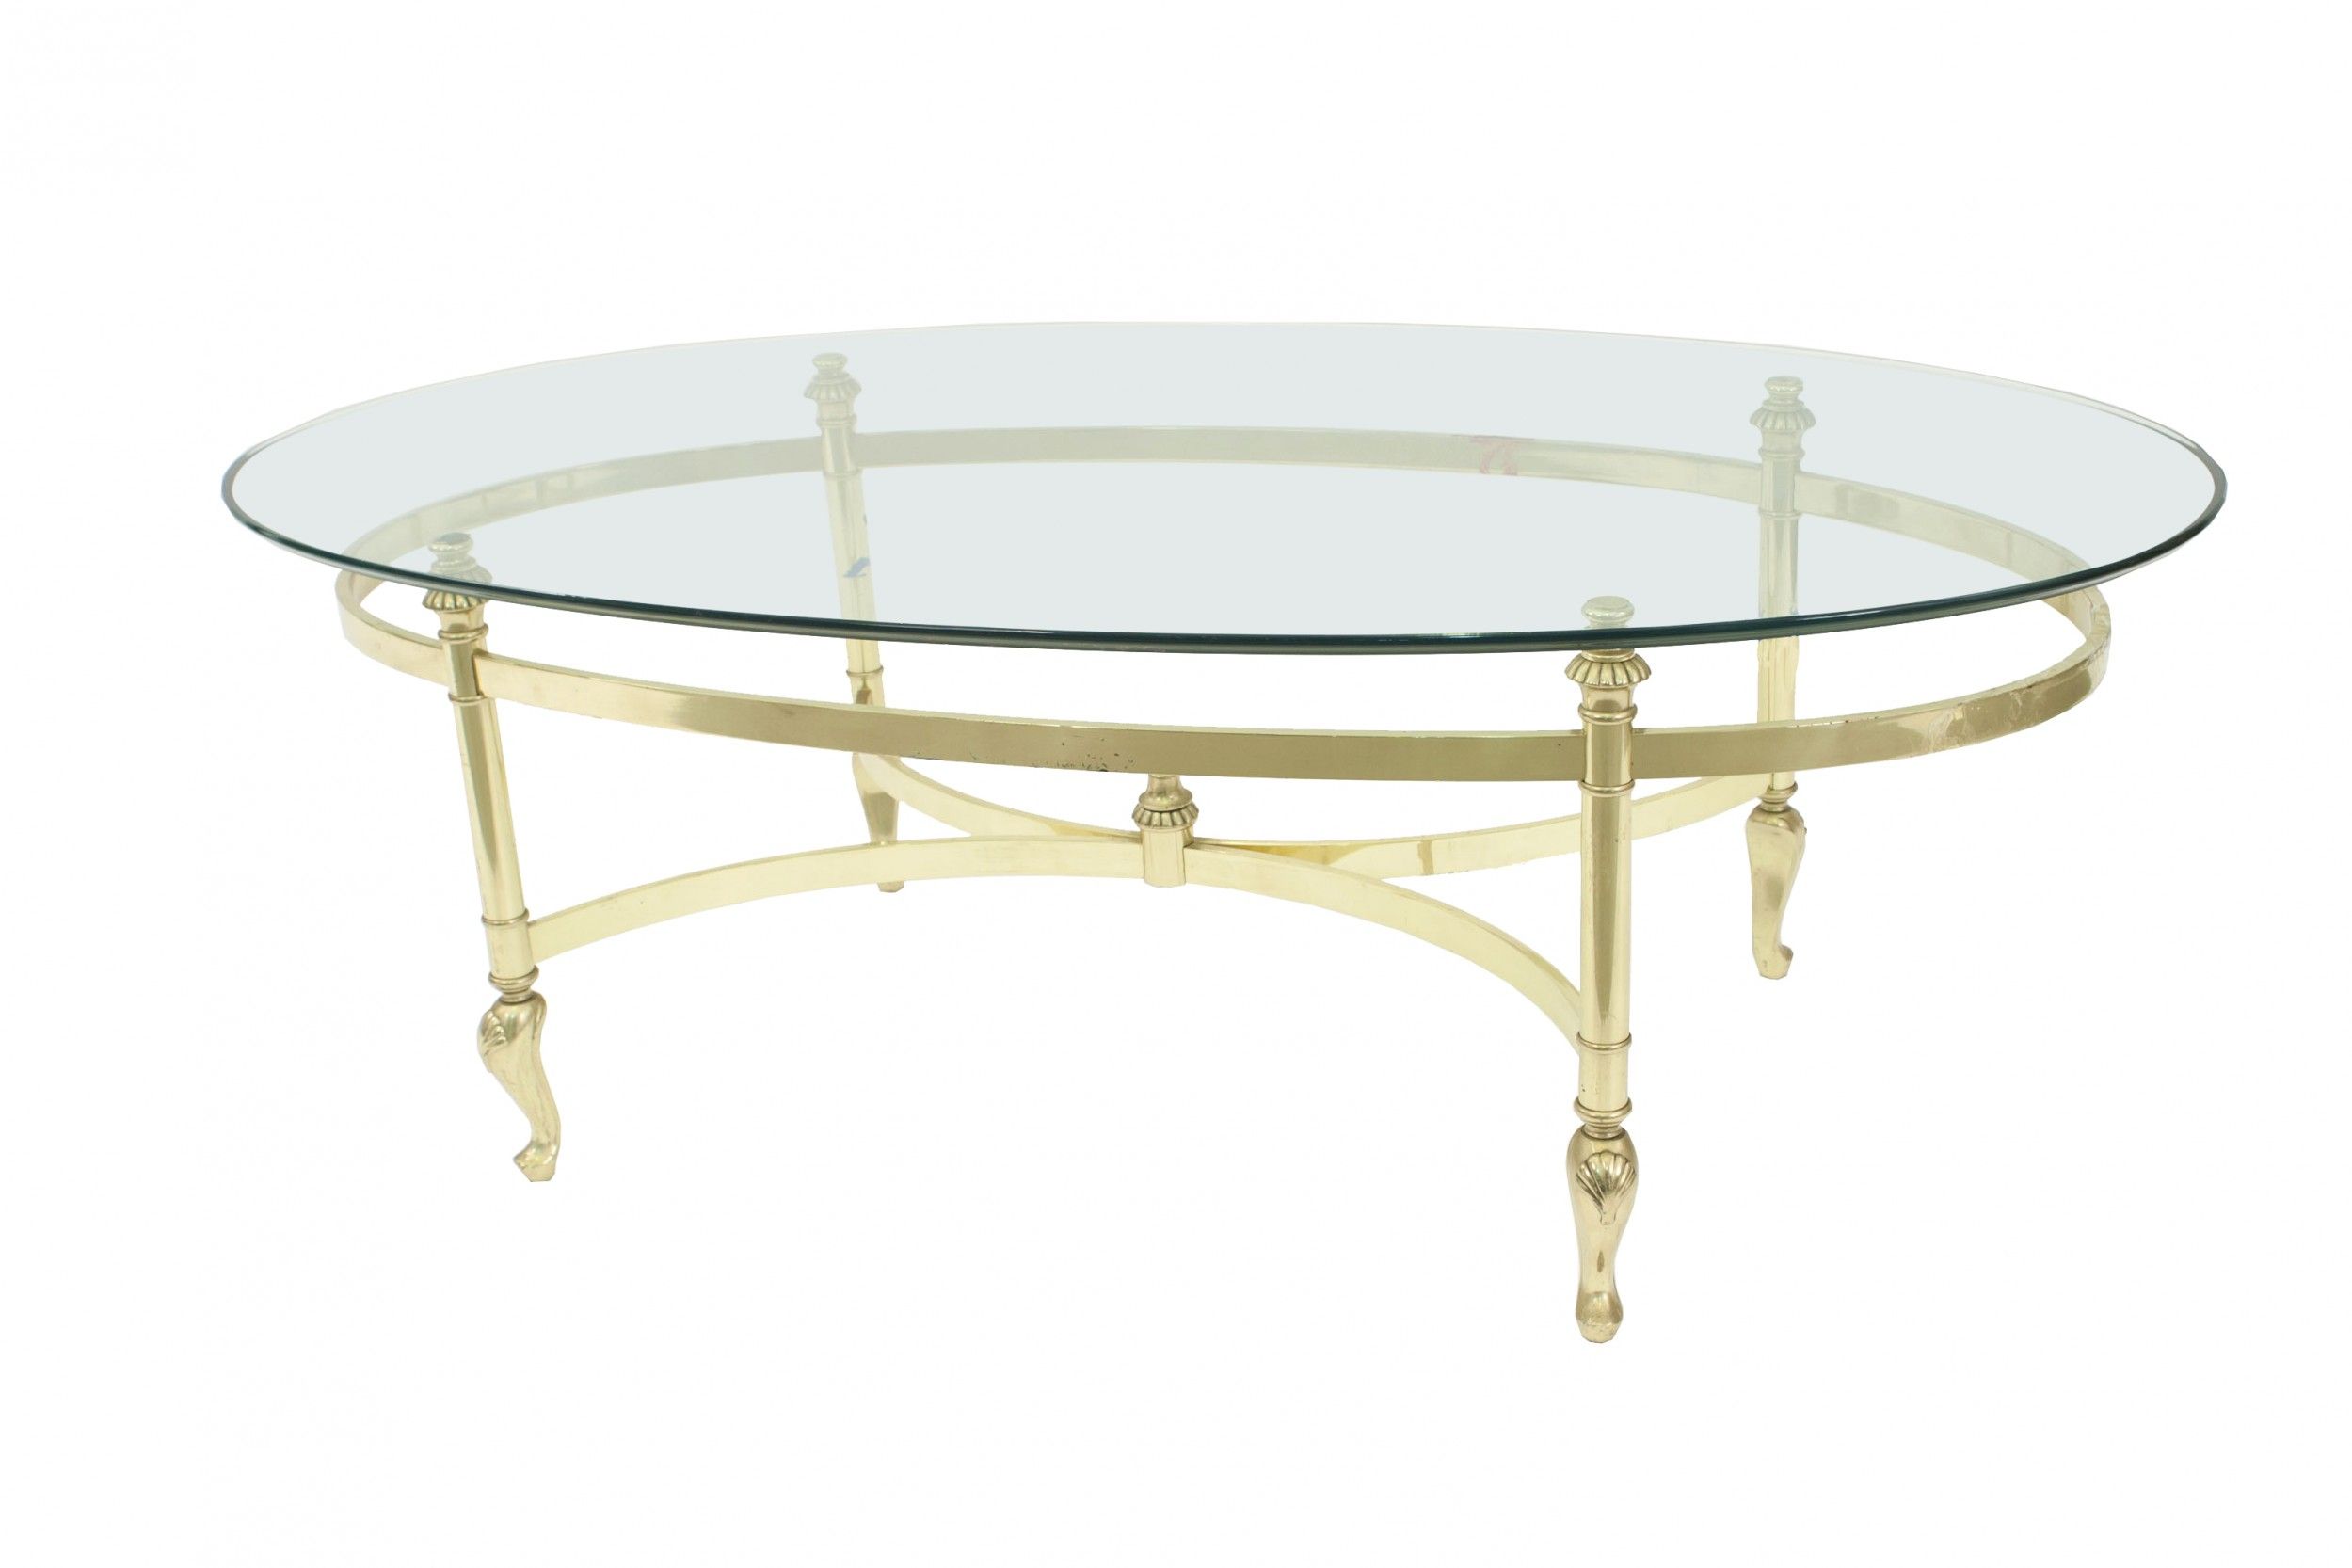 Contemporary Brass And Glass Coffee Table In Glass Oval Coffee Tables (View 8 of 20)